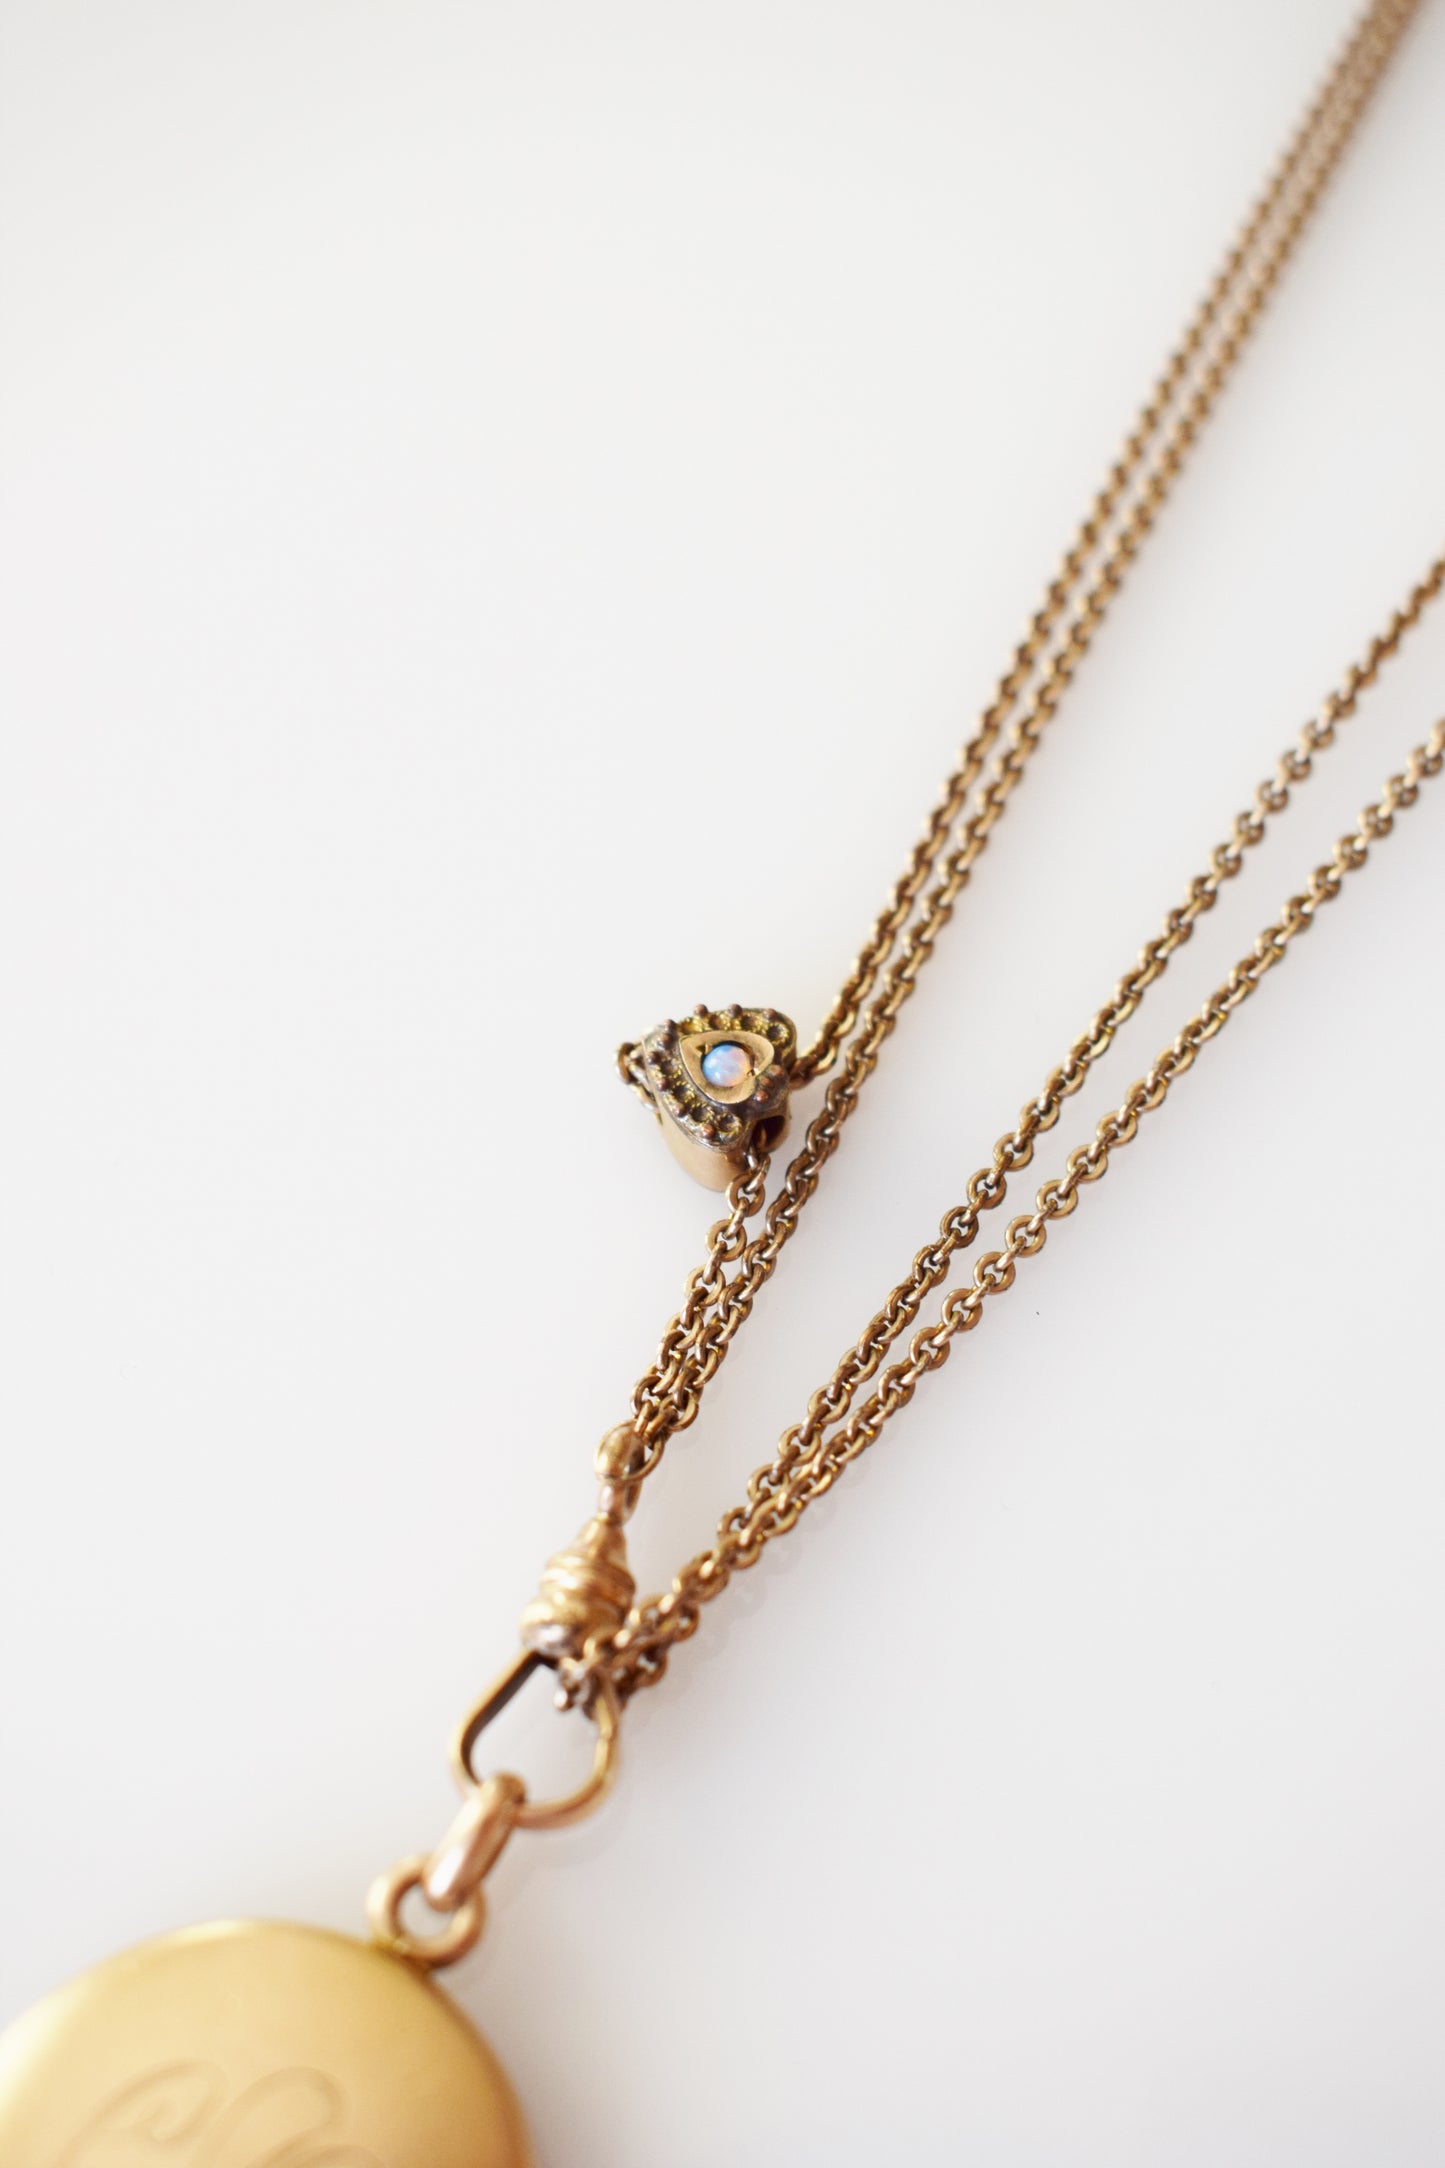 Edwardian Gold Locket with Chain and Opal-Set Slider | CAP